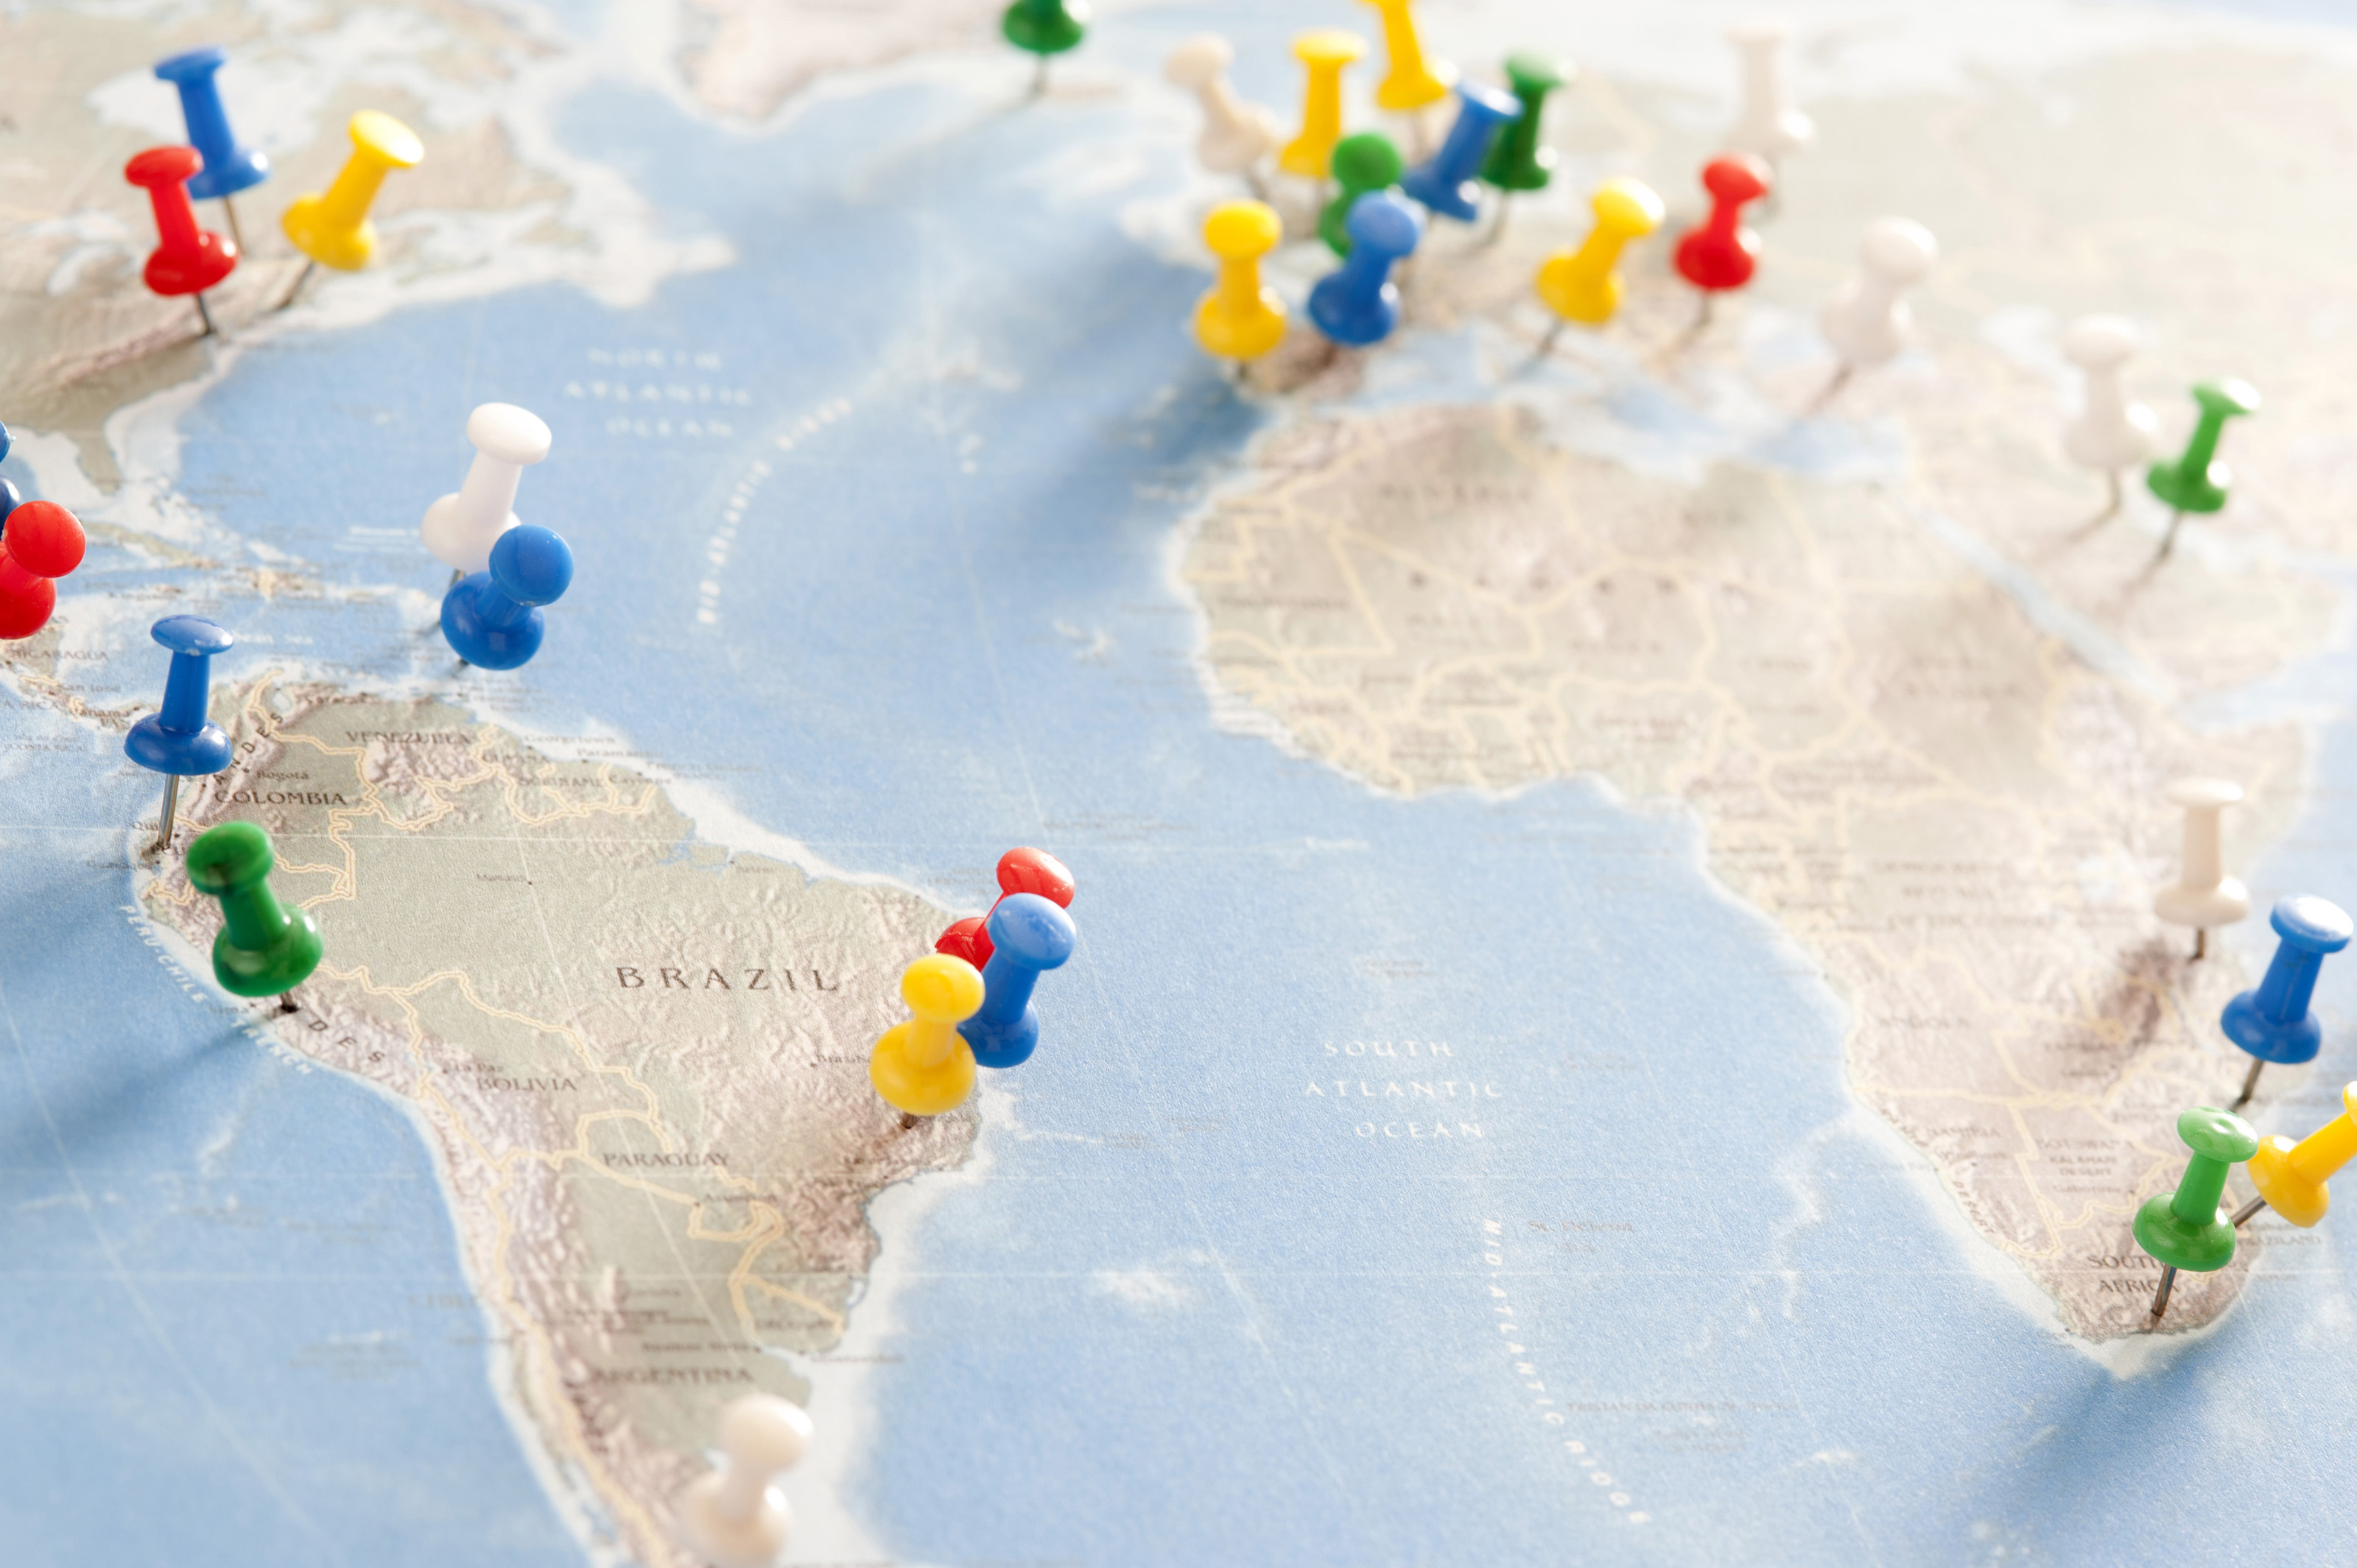 Free Stock Photo 10697 Colored Pins Pinned On South Atlantic Map